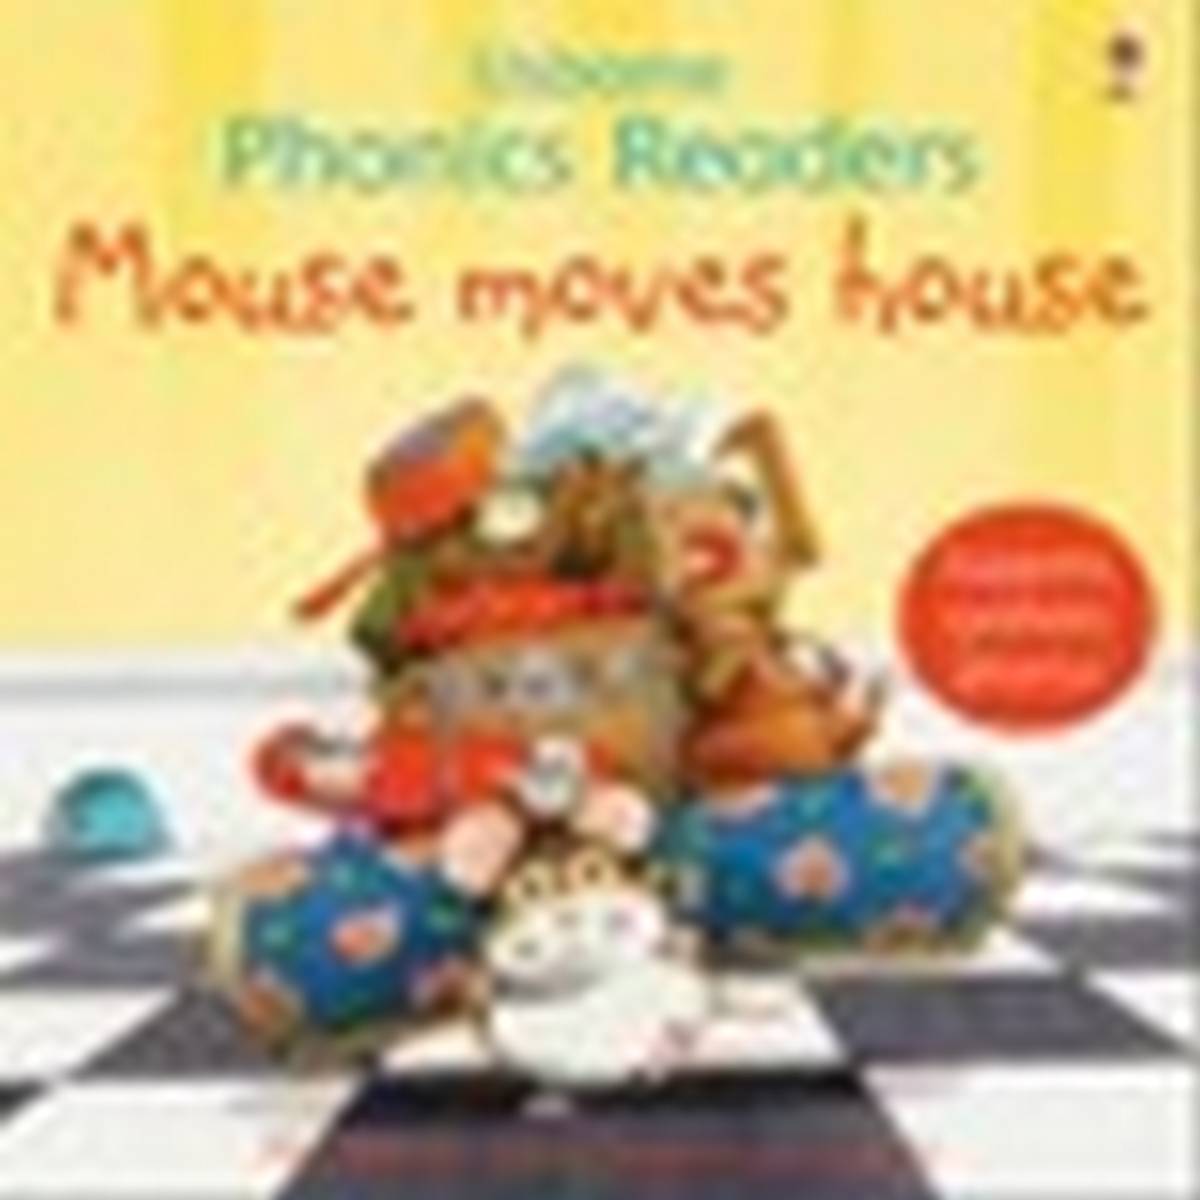 Mouse Moves House (Phonics Readers)